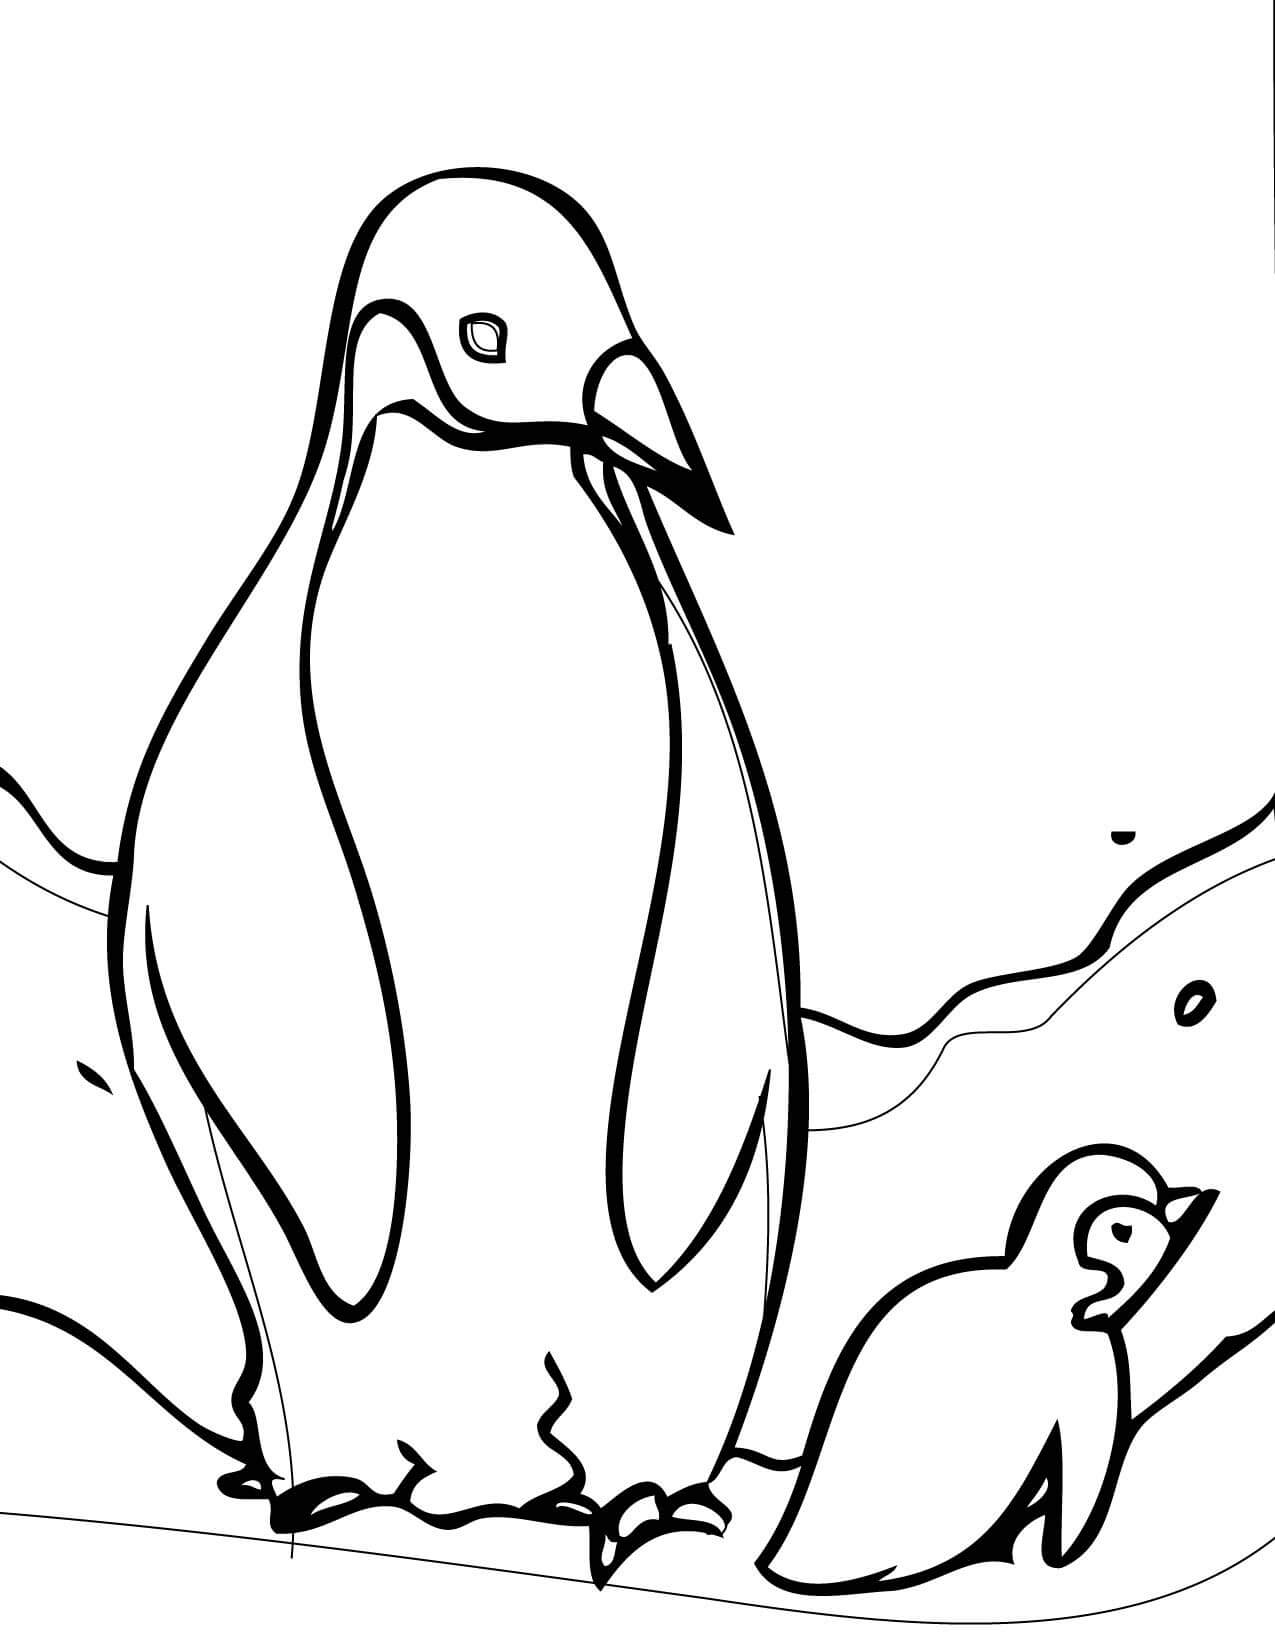 Mom and Baby Penguin Coloring Page